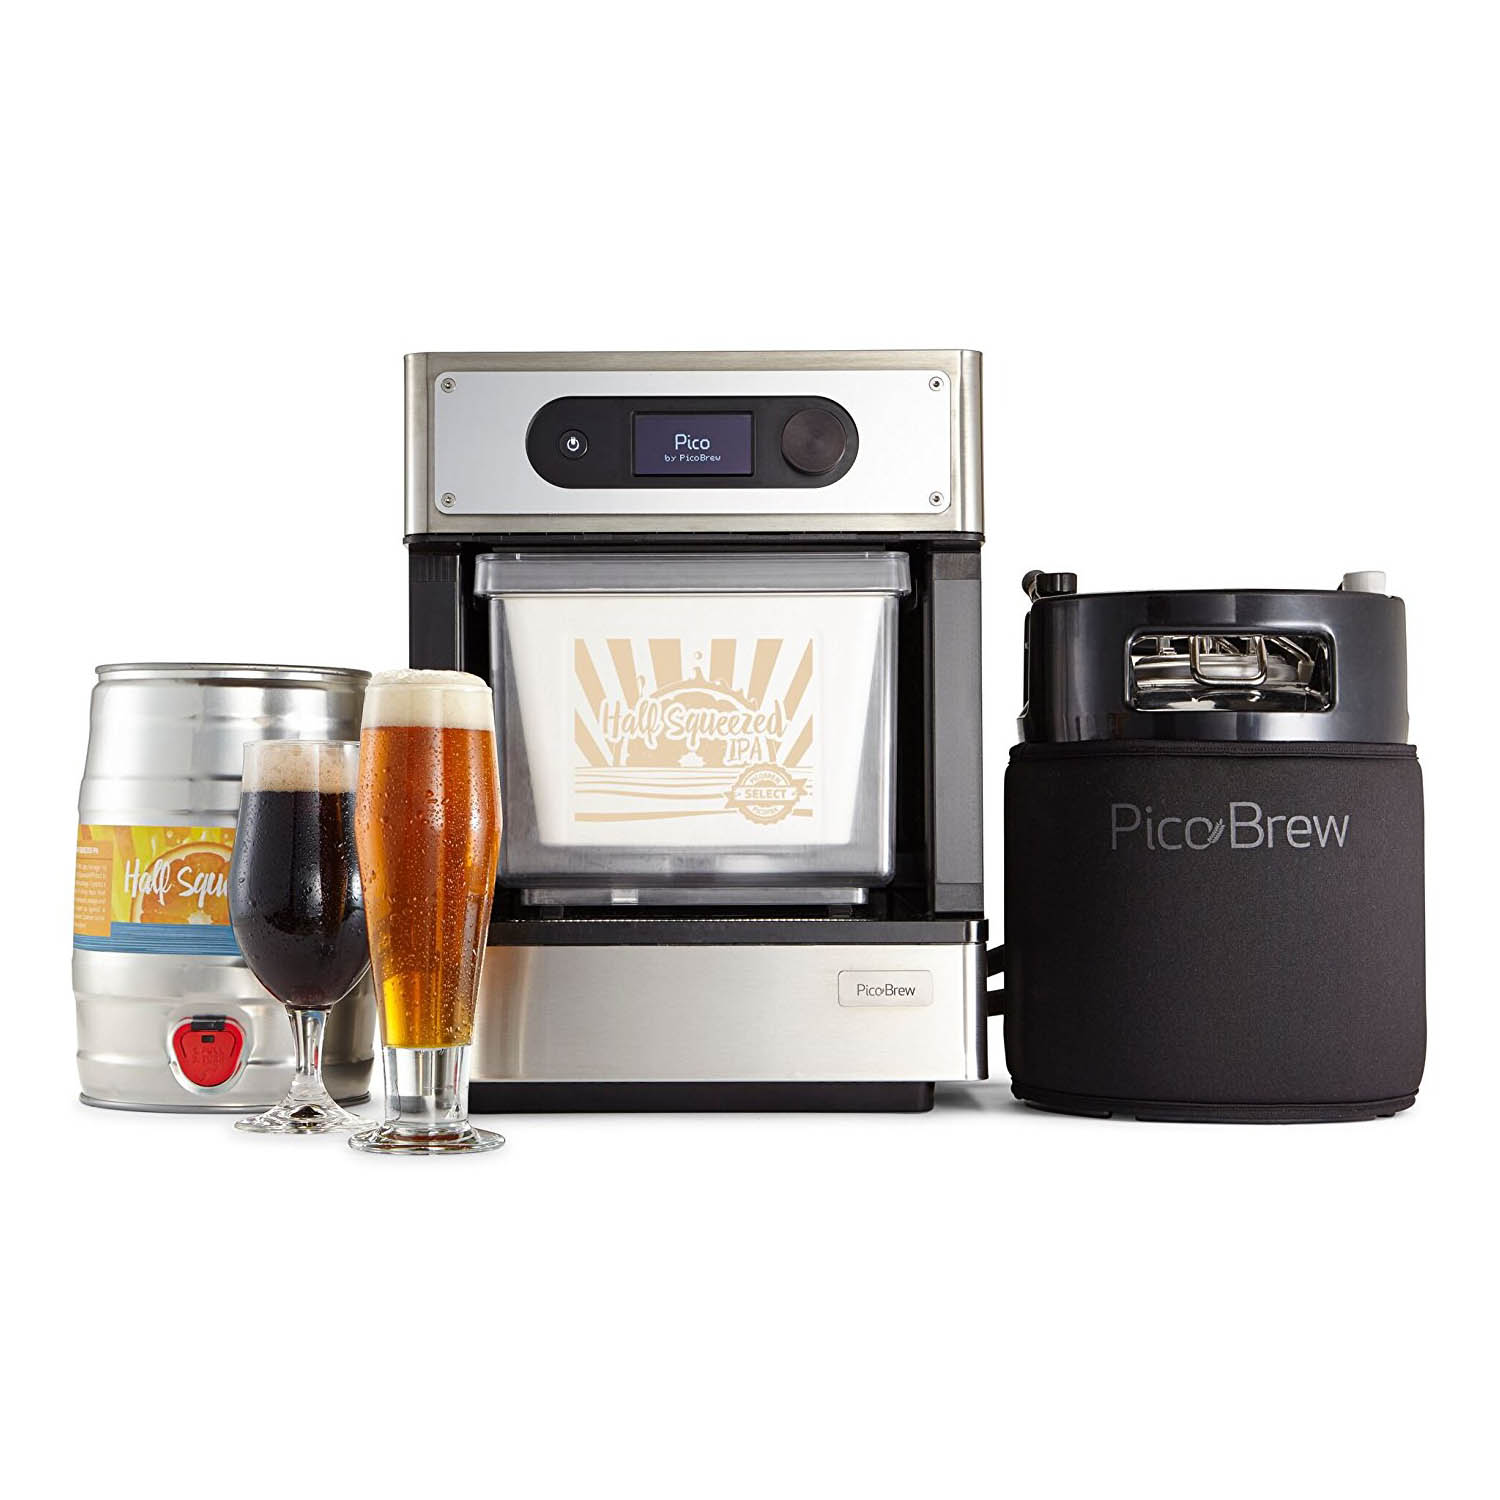 Craft Beer Brewing Appliance - OMG Gimme